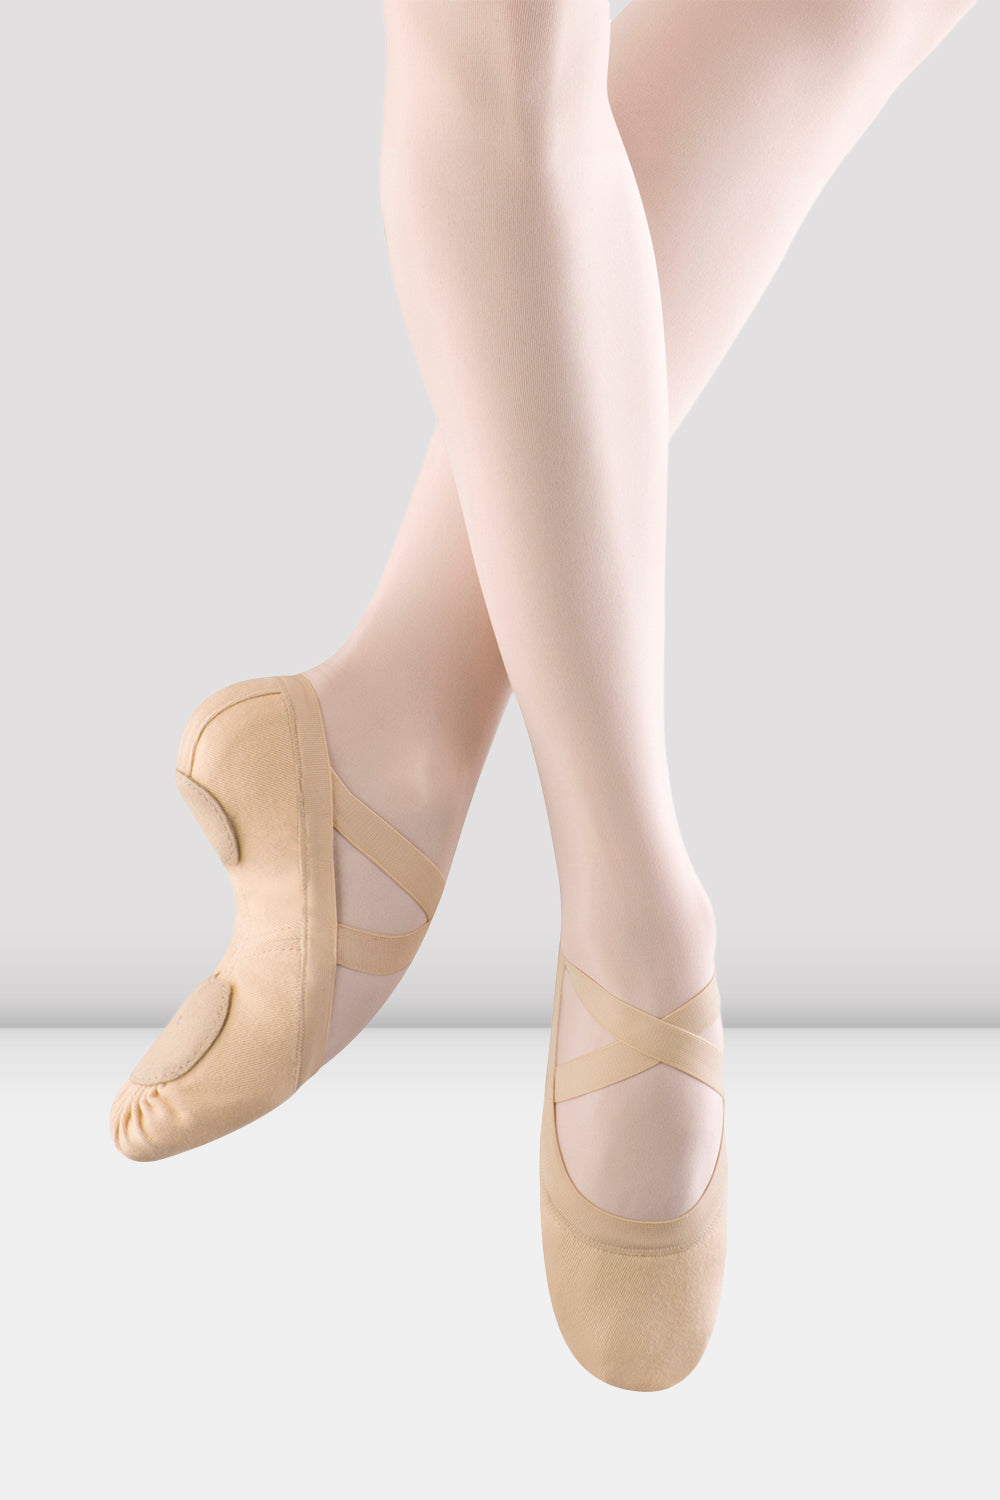 BLOCH Ladies Synchrony Stretch Canvas Ballet Shoes, Light Sand Canvas